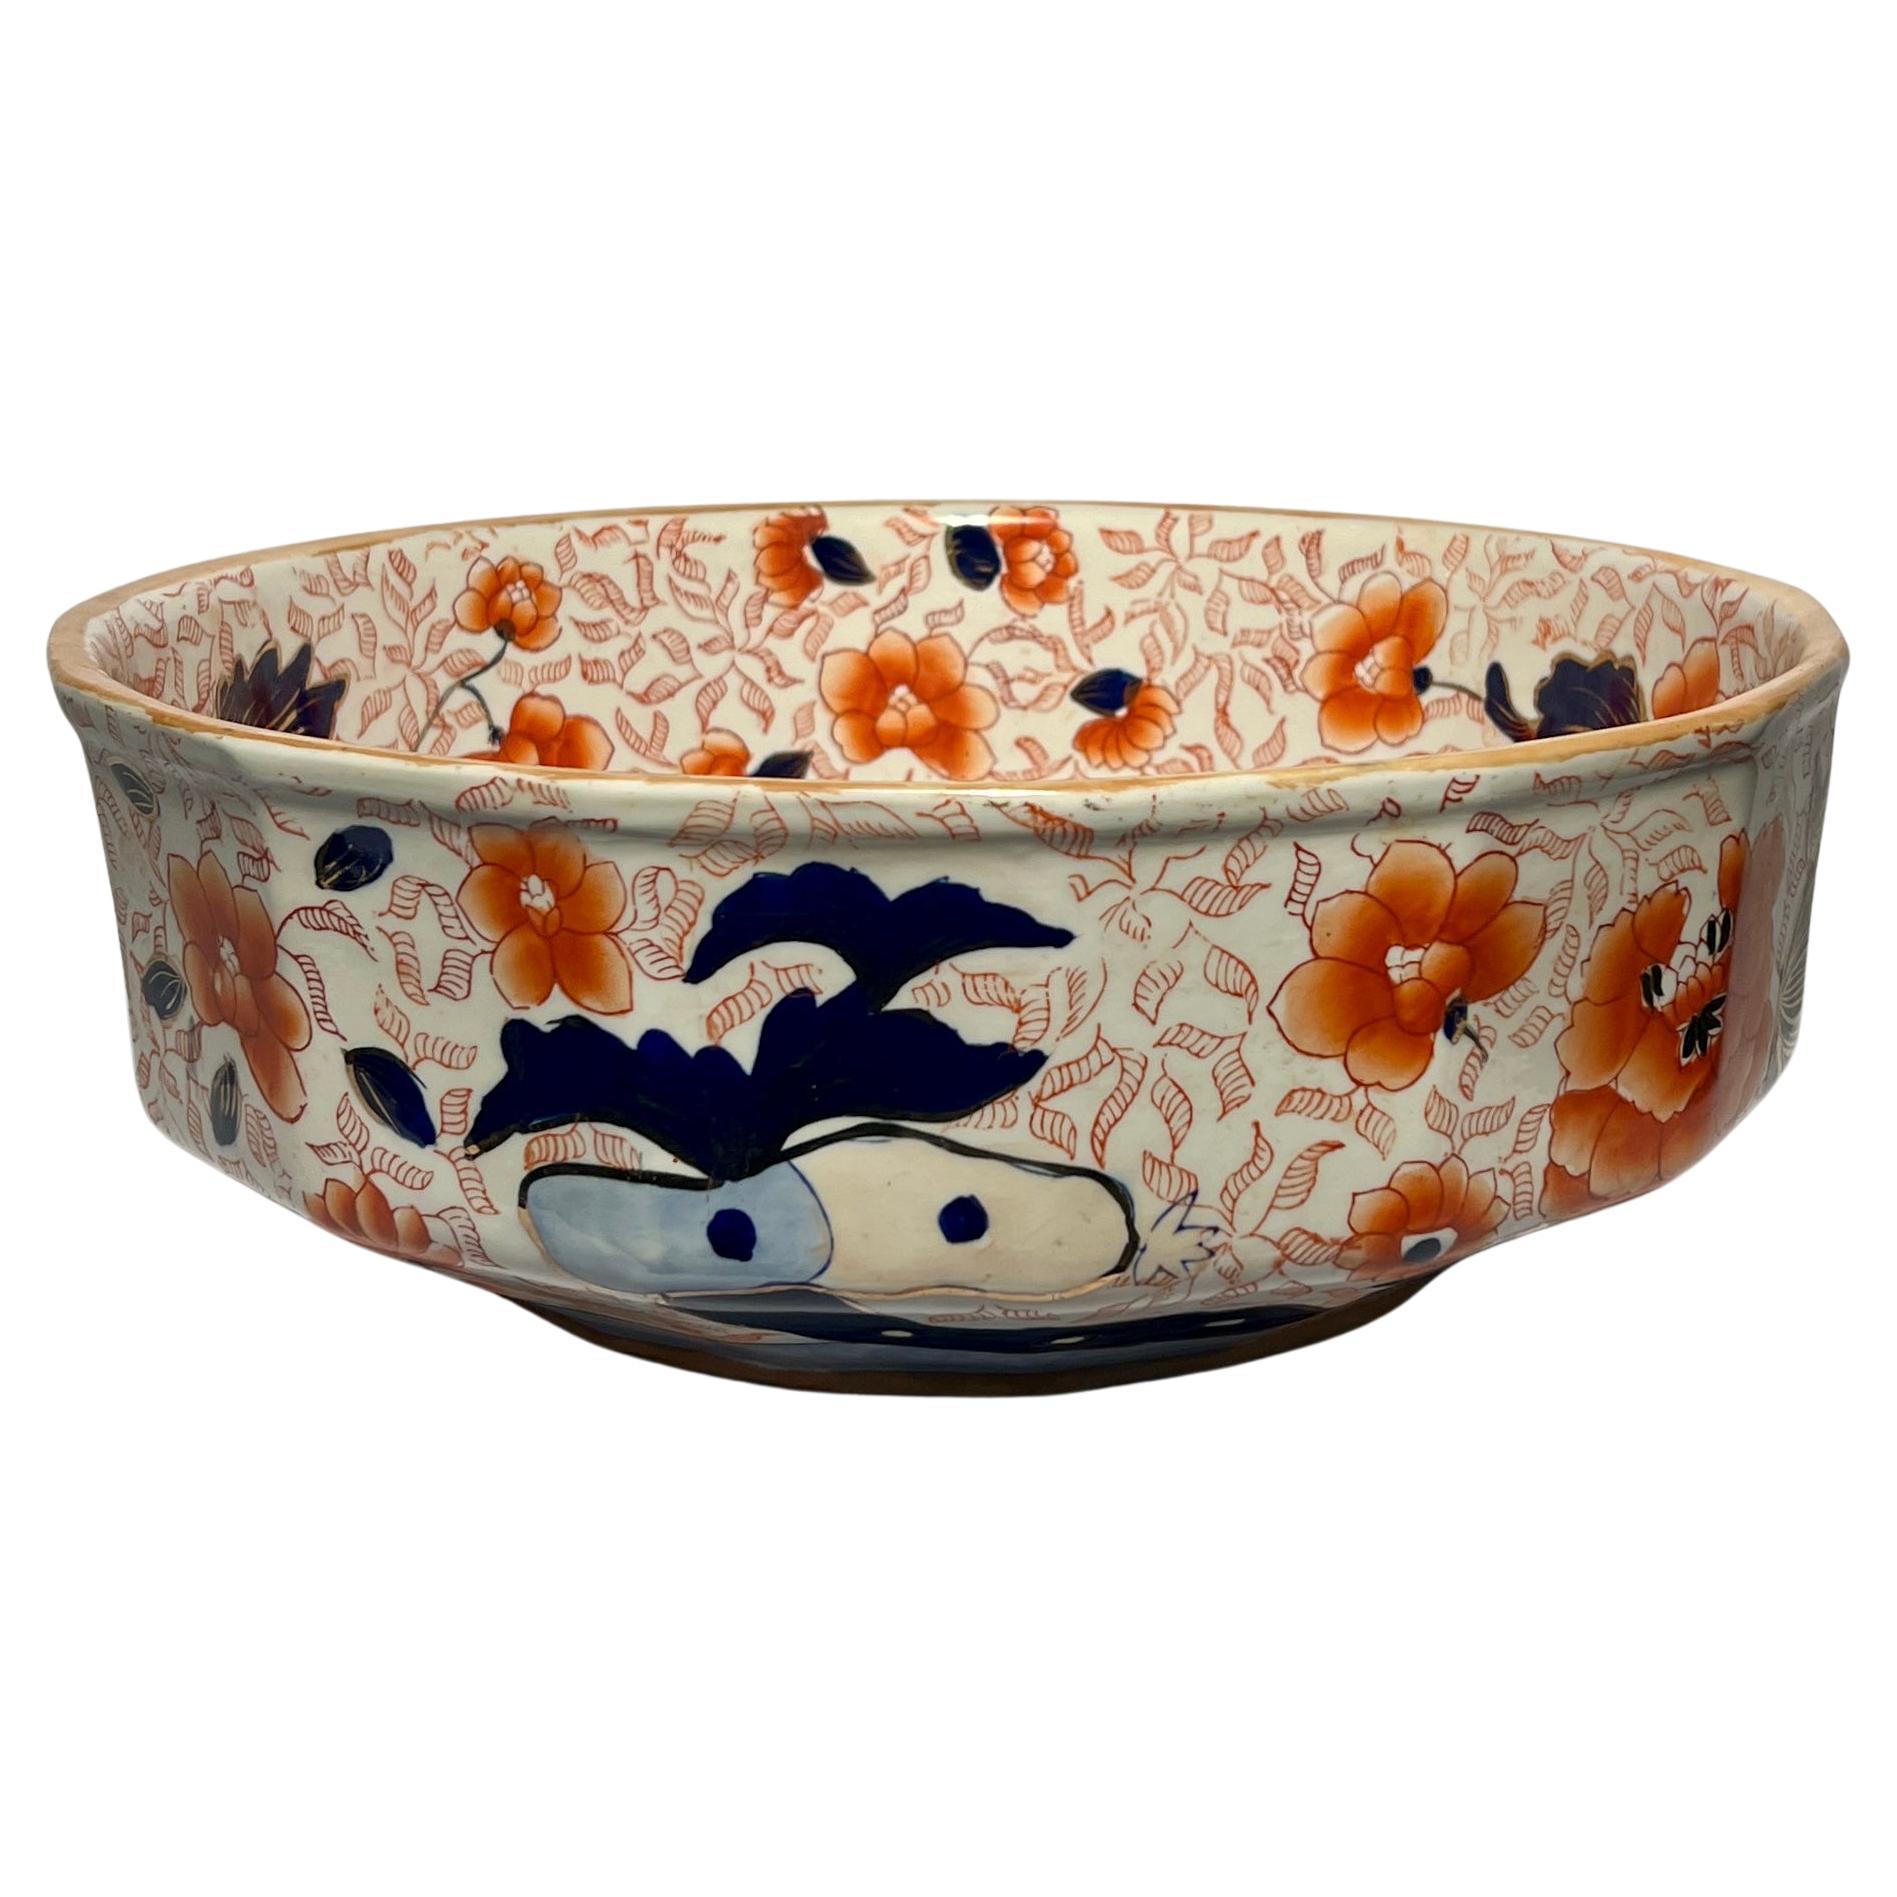 Estate English Red and Blue Ironstone Centerpiece Bowl, Circa 1950's-1960's. For Sale